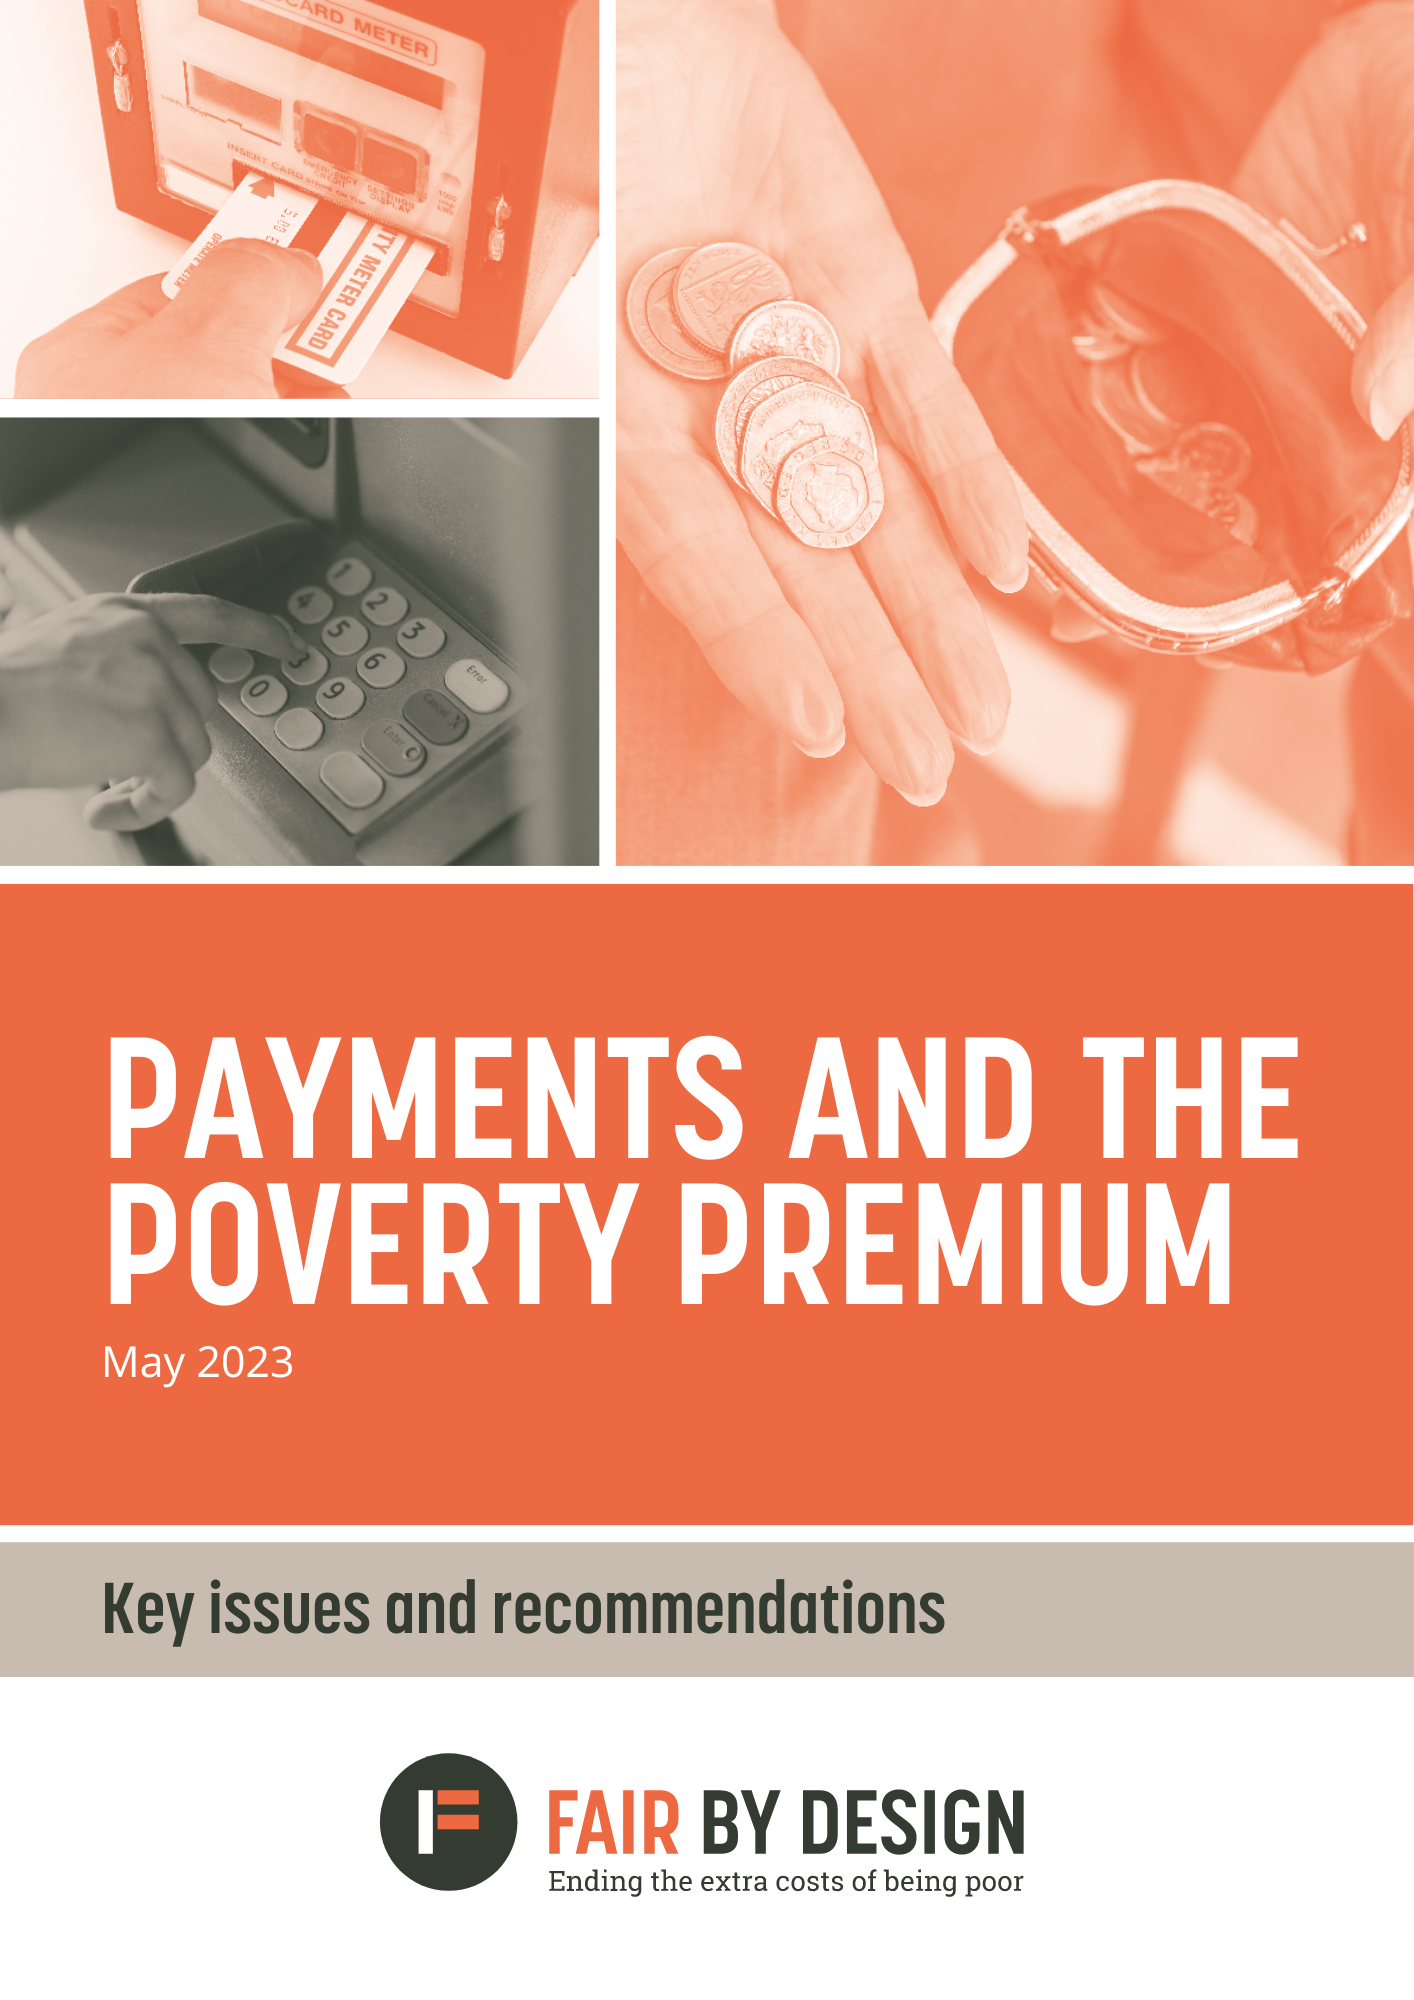 Photo of the front cover of a Fair By Design report titled Payments and The Poverty Premium